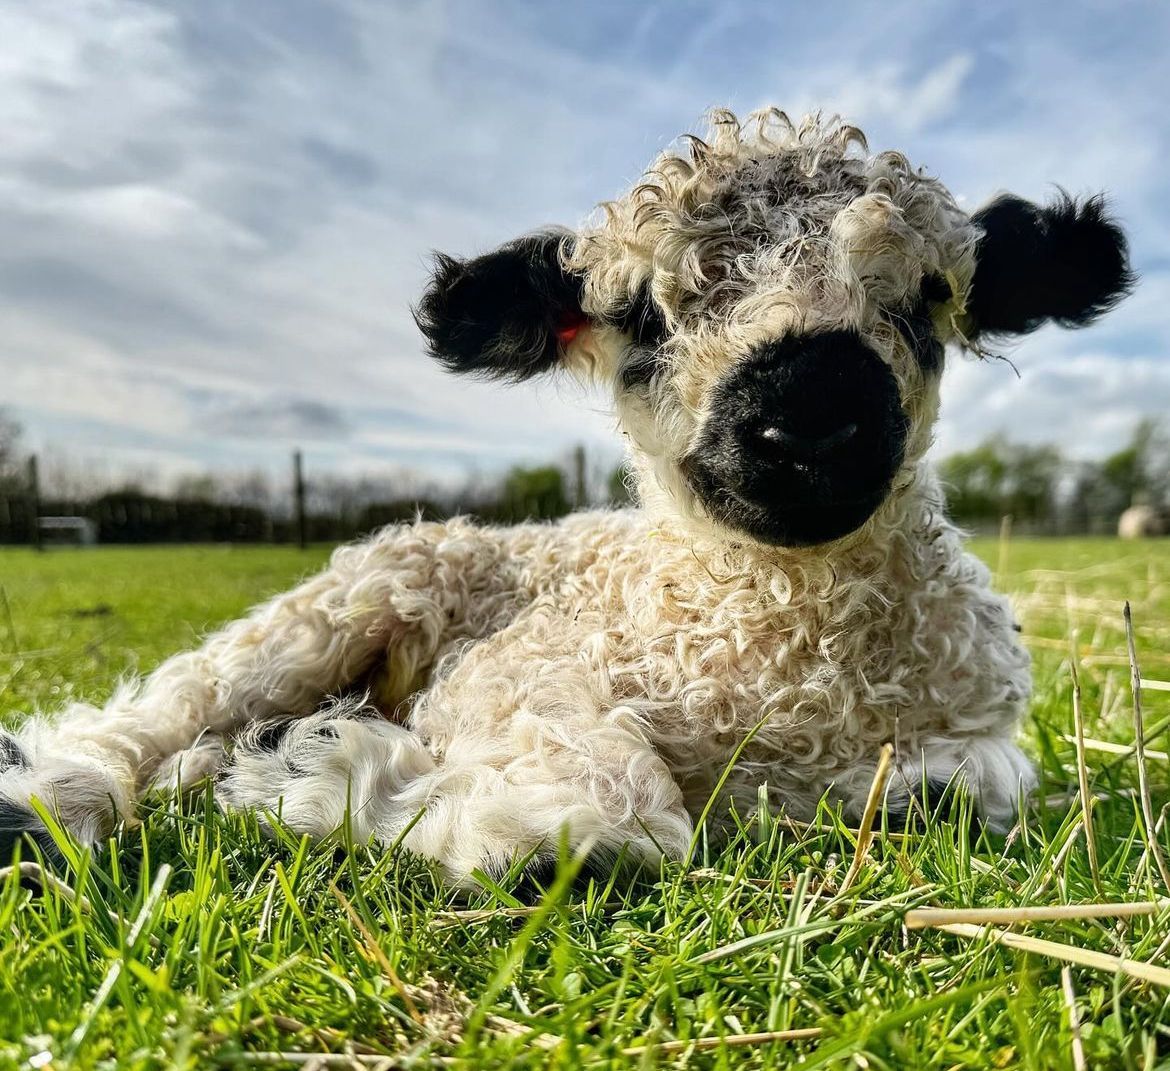 Happy #SheepSunday - meet Fred 😍, a new lamb born in the Spring lambing season and with the seasonal change hopefully more blue skies, sunshine and warmer weather to come.....💙 ☀️ 📸 IG morningsideherdwicks, Fred is their first lamb of 2024 born this week